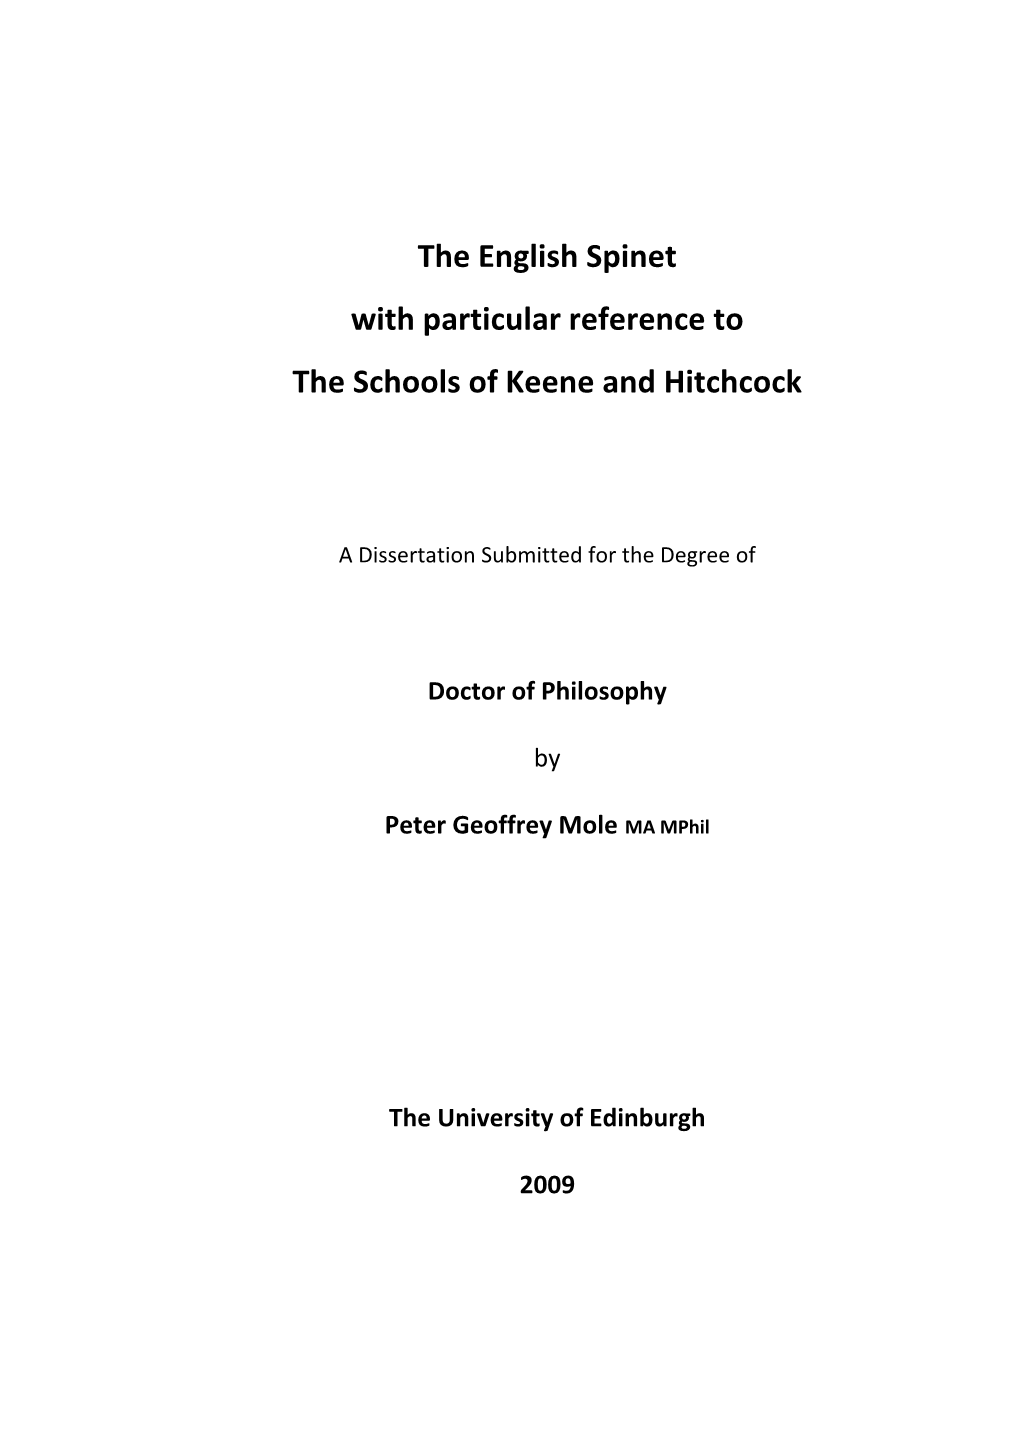 The English Spinet with Particular Reference to the Schools of Keene and Hitchcock